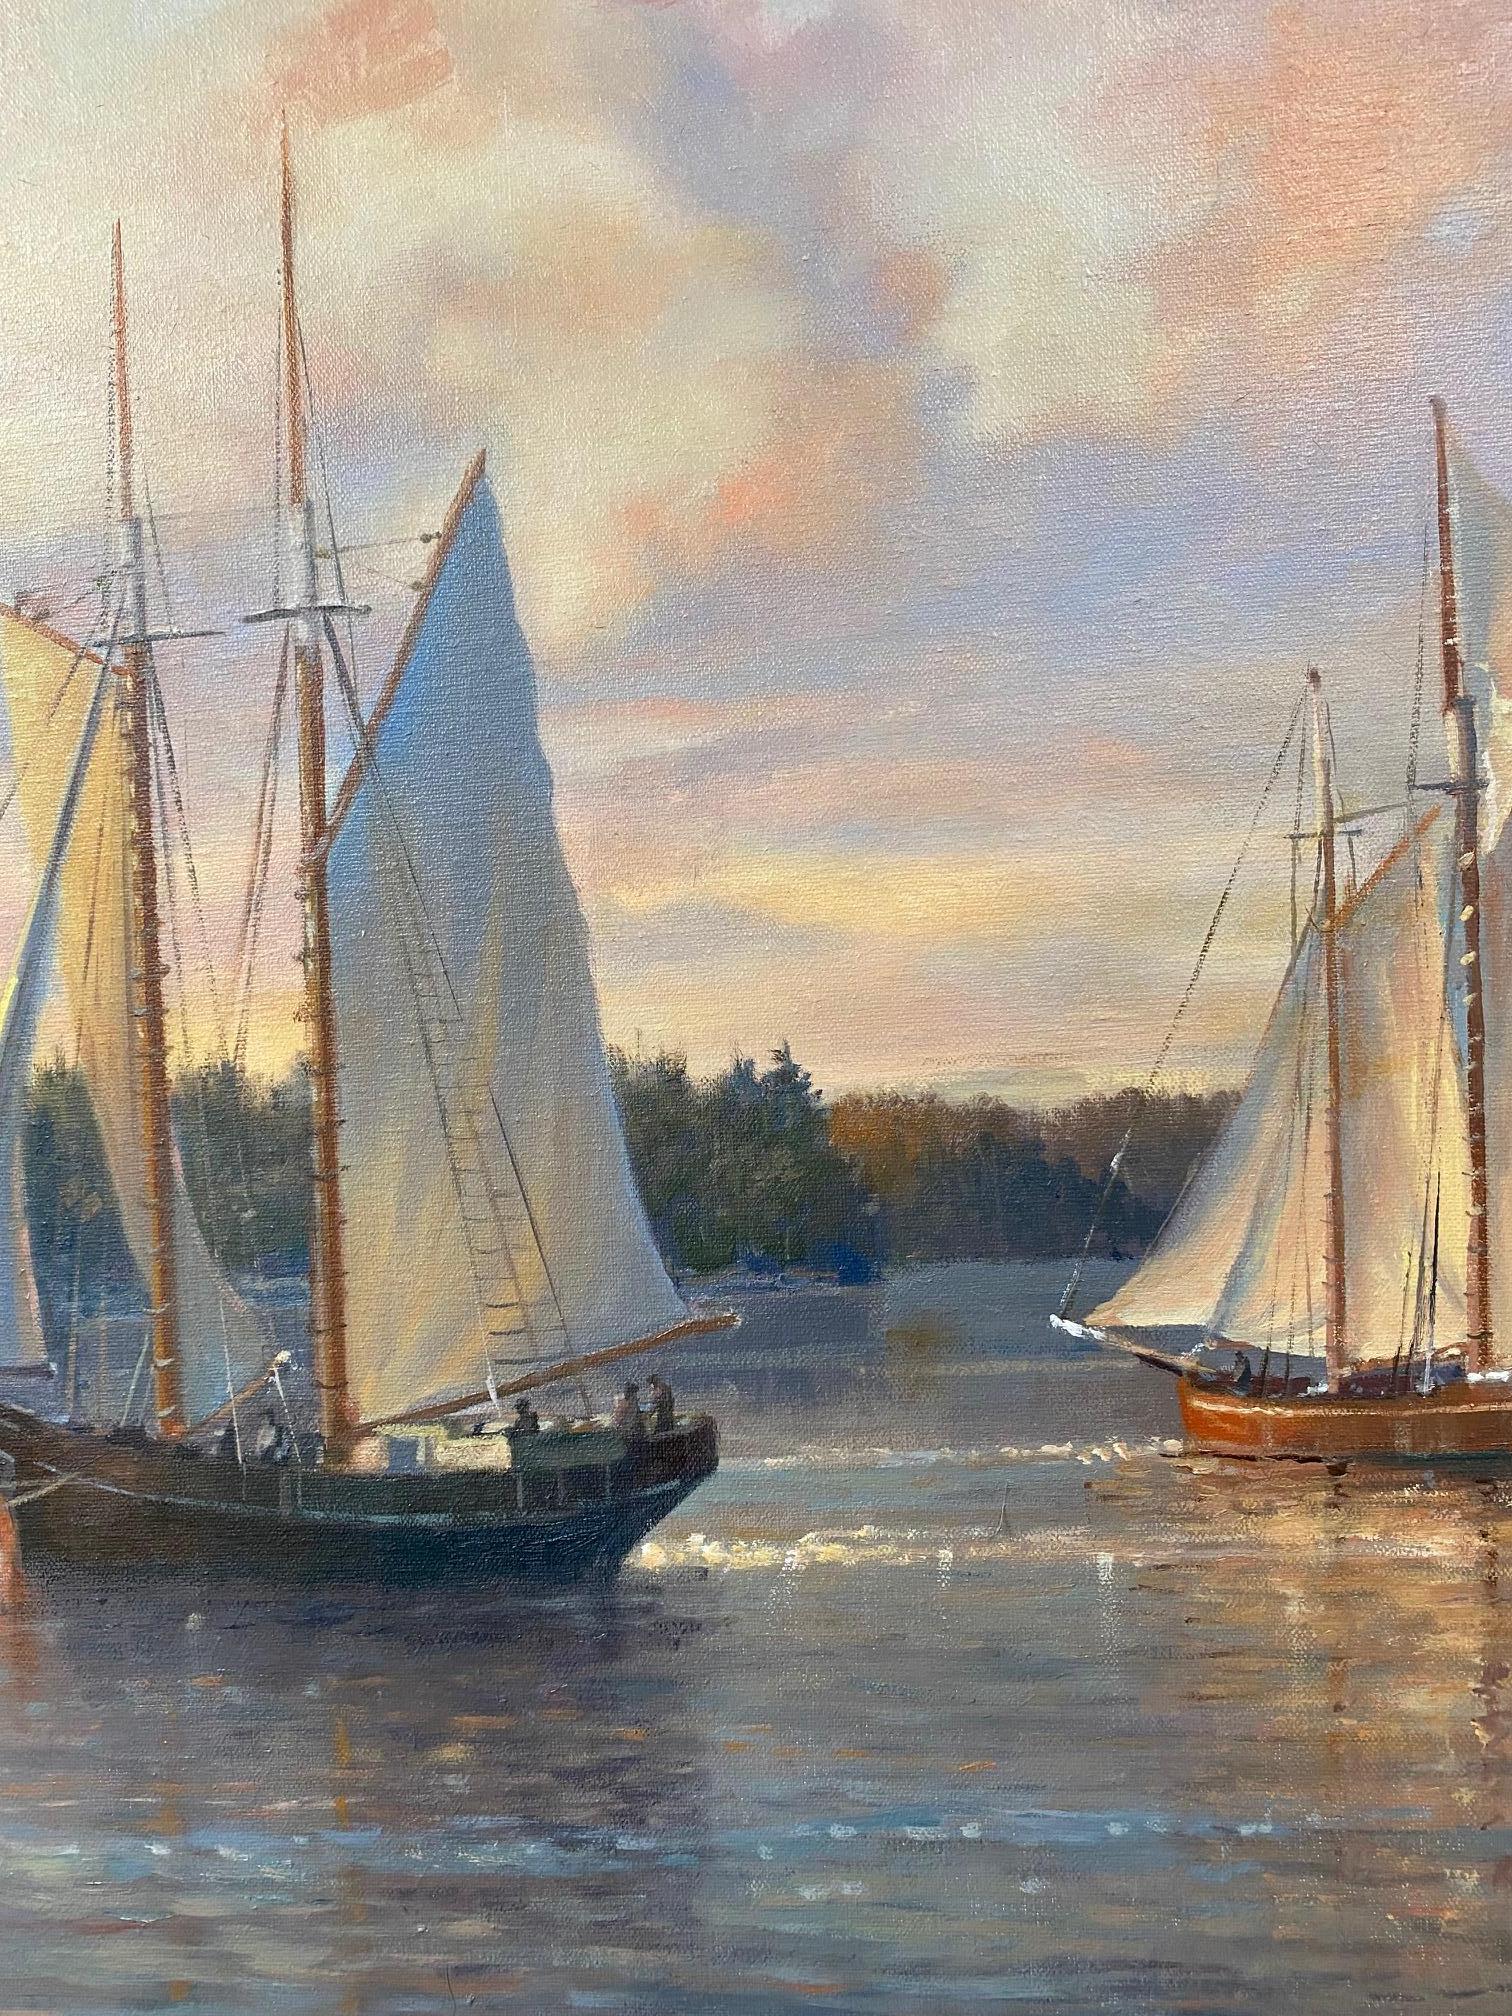 Oh the stories that this coastal scene at the last light of the day could tell! The sky is nearly flashing as the sun light diminishes sending pools of sparkles on the water's surface. The crew and guests on the schooners, smaller sailboats and